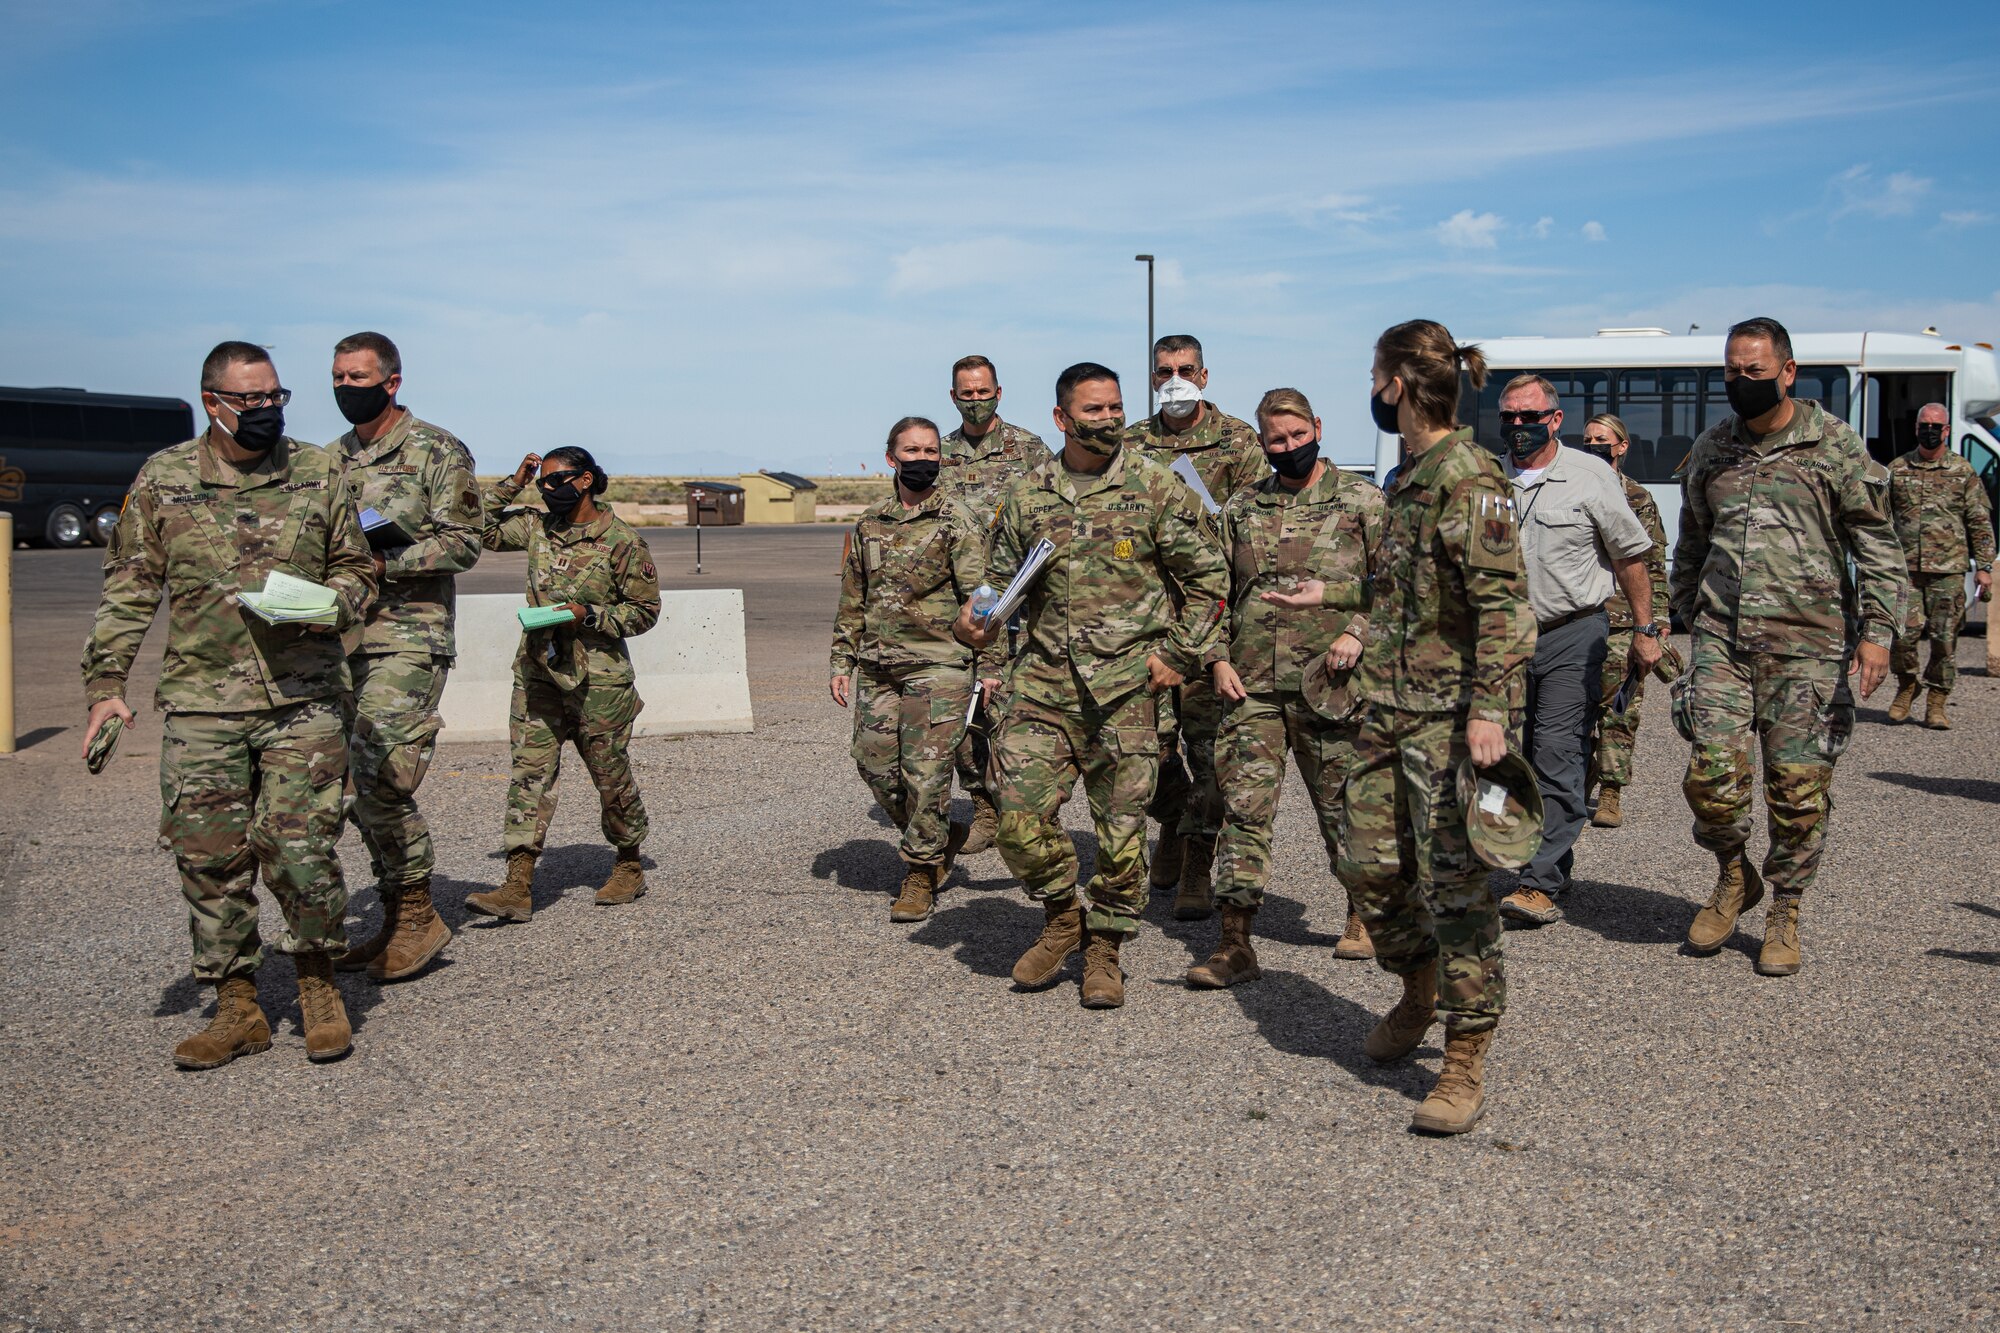 U.S. Air Force 1st Lt. Whitney Longenecker, front right, briefs representatives from U.S. Army North during a visit to Holloman Air Force Base, New Mexico, Sept. 23, 2021. The Department of Defense, through U.S. Northern Command, and in support of the Department of State and Department of Homeland Security, is providing transportation, temporary housing, medical screening, and general support for at least 50,000 Afghan evacuees at suitable facilities, in permanent or temporary structures, as quickly as possible. This initiative provides Afghan evacuees essential support at secure locations outside Afghanistan. (U.S. Army photo by Pfc. Anthony Sanchez)